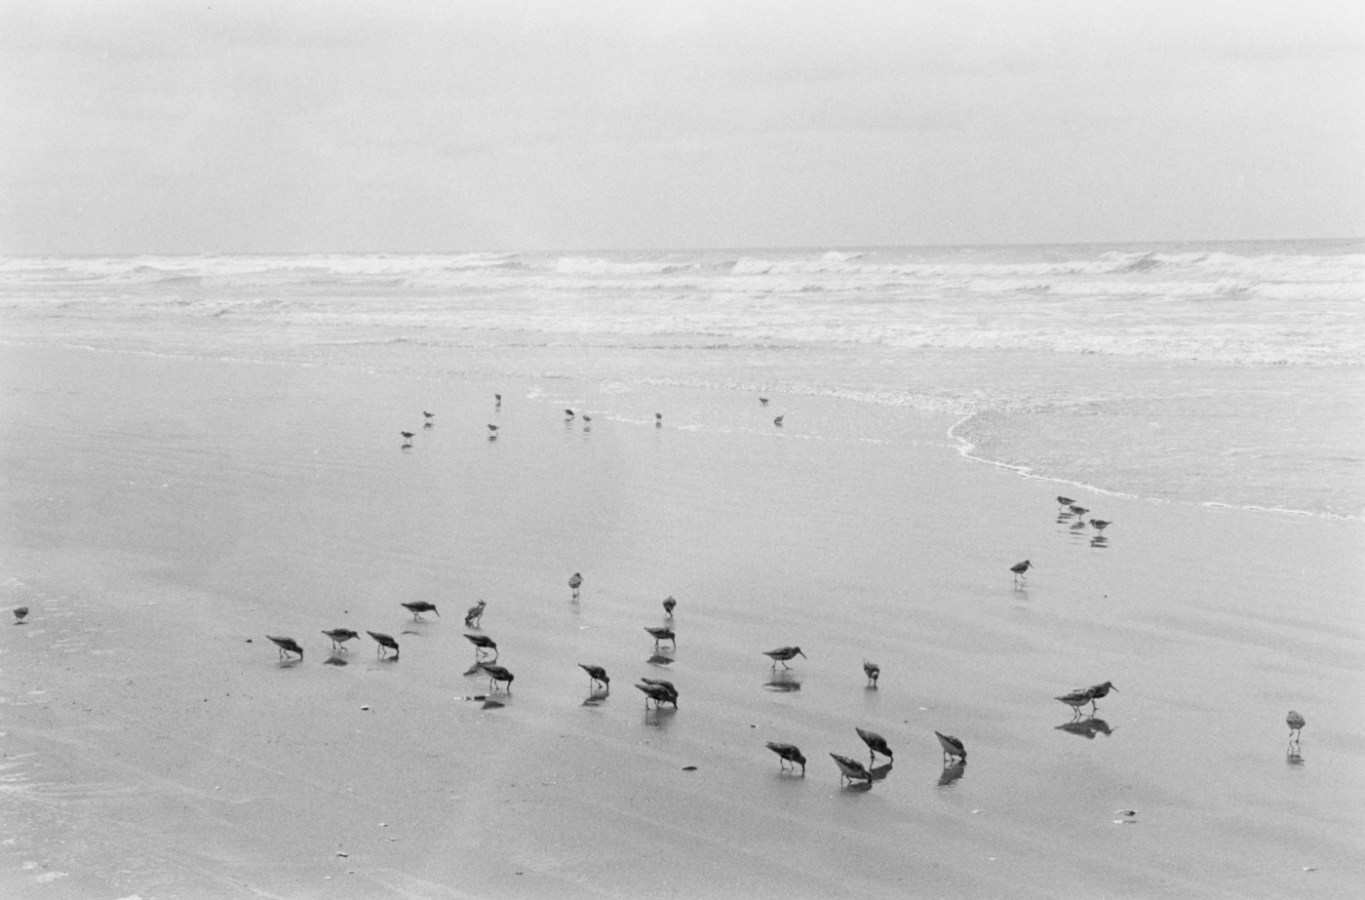 Black and white horizontal photograph of birds on a beach